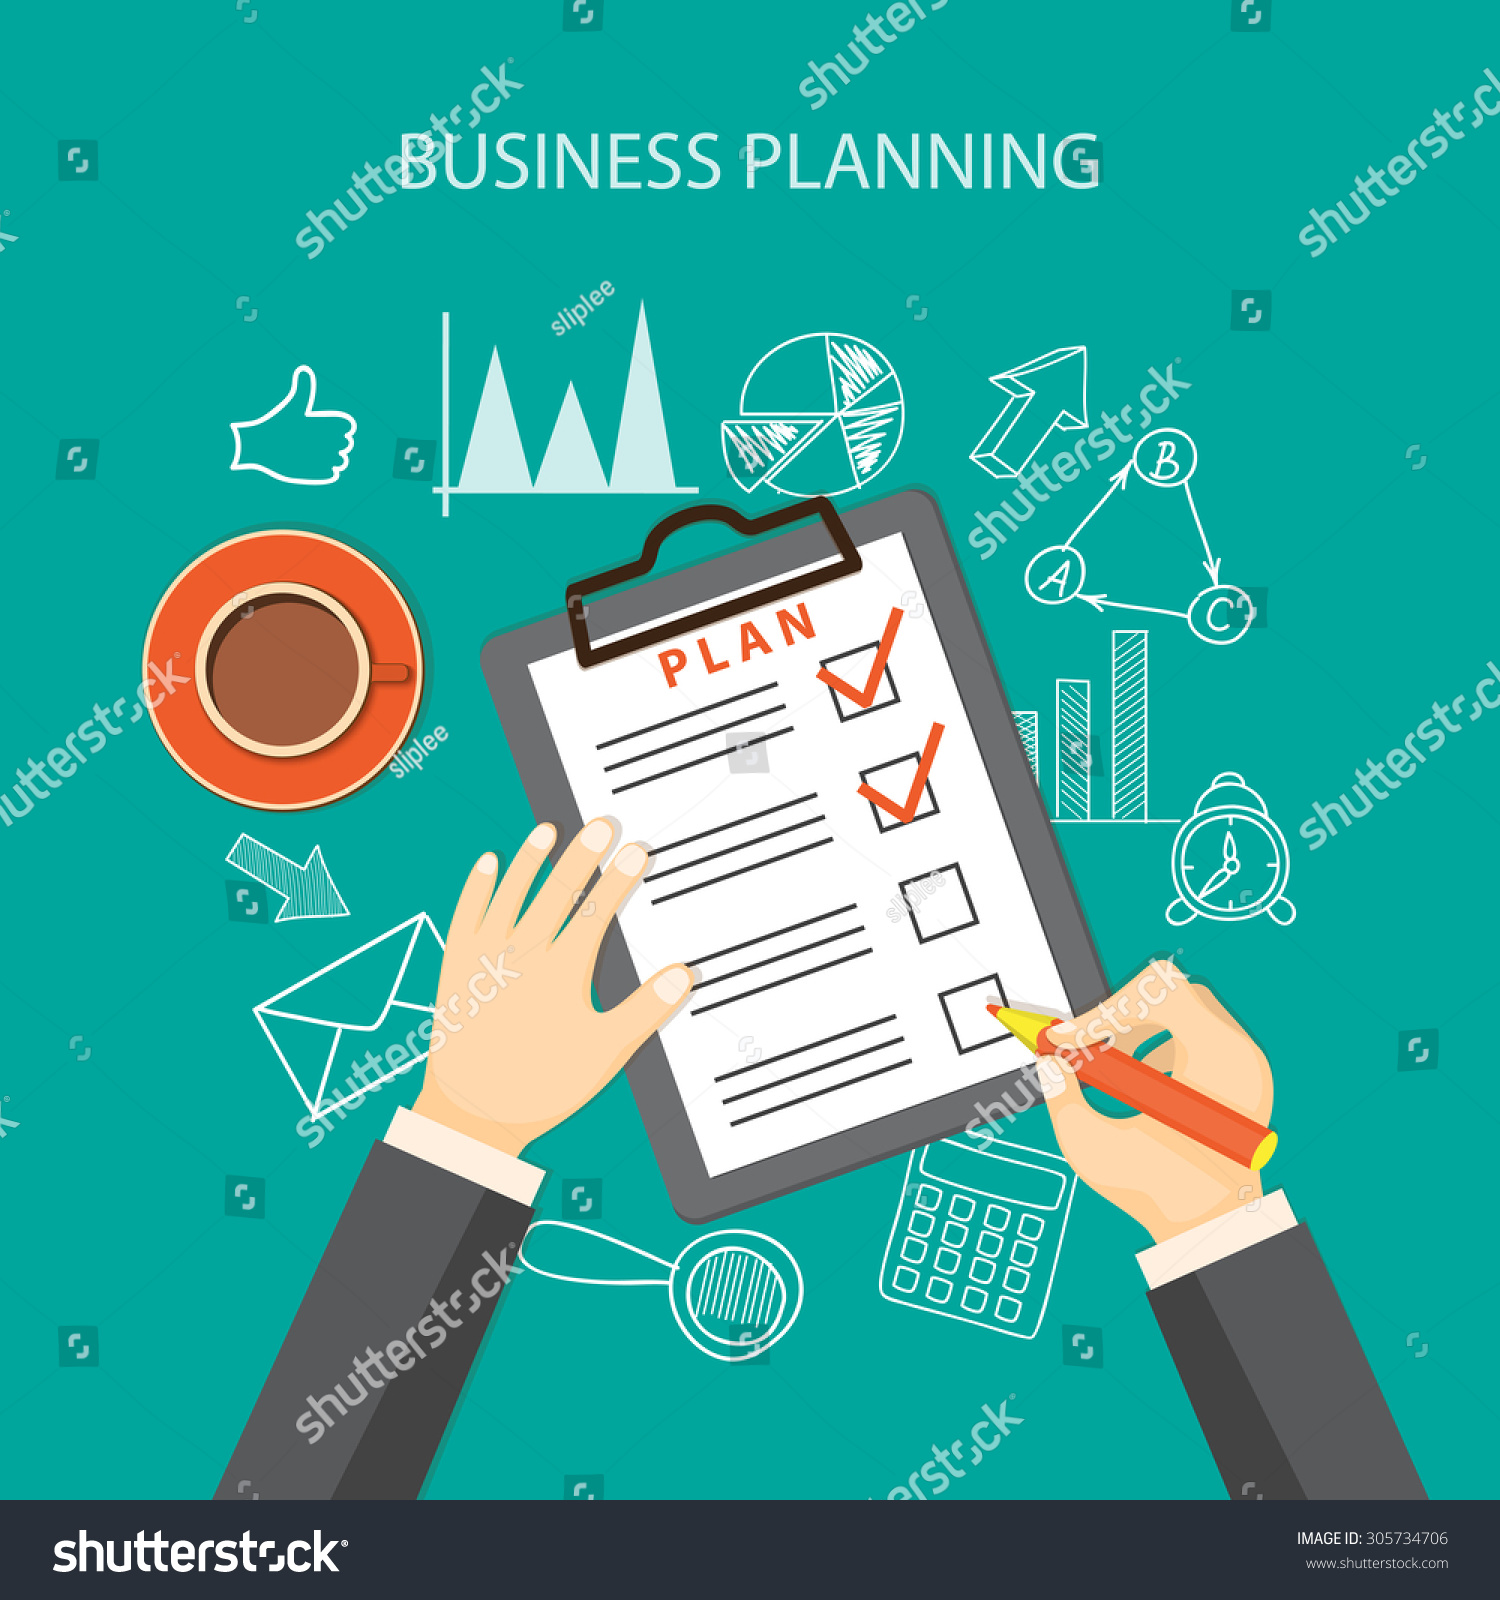 10 Reasons Why You Should Write A Business Plan